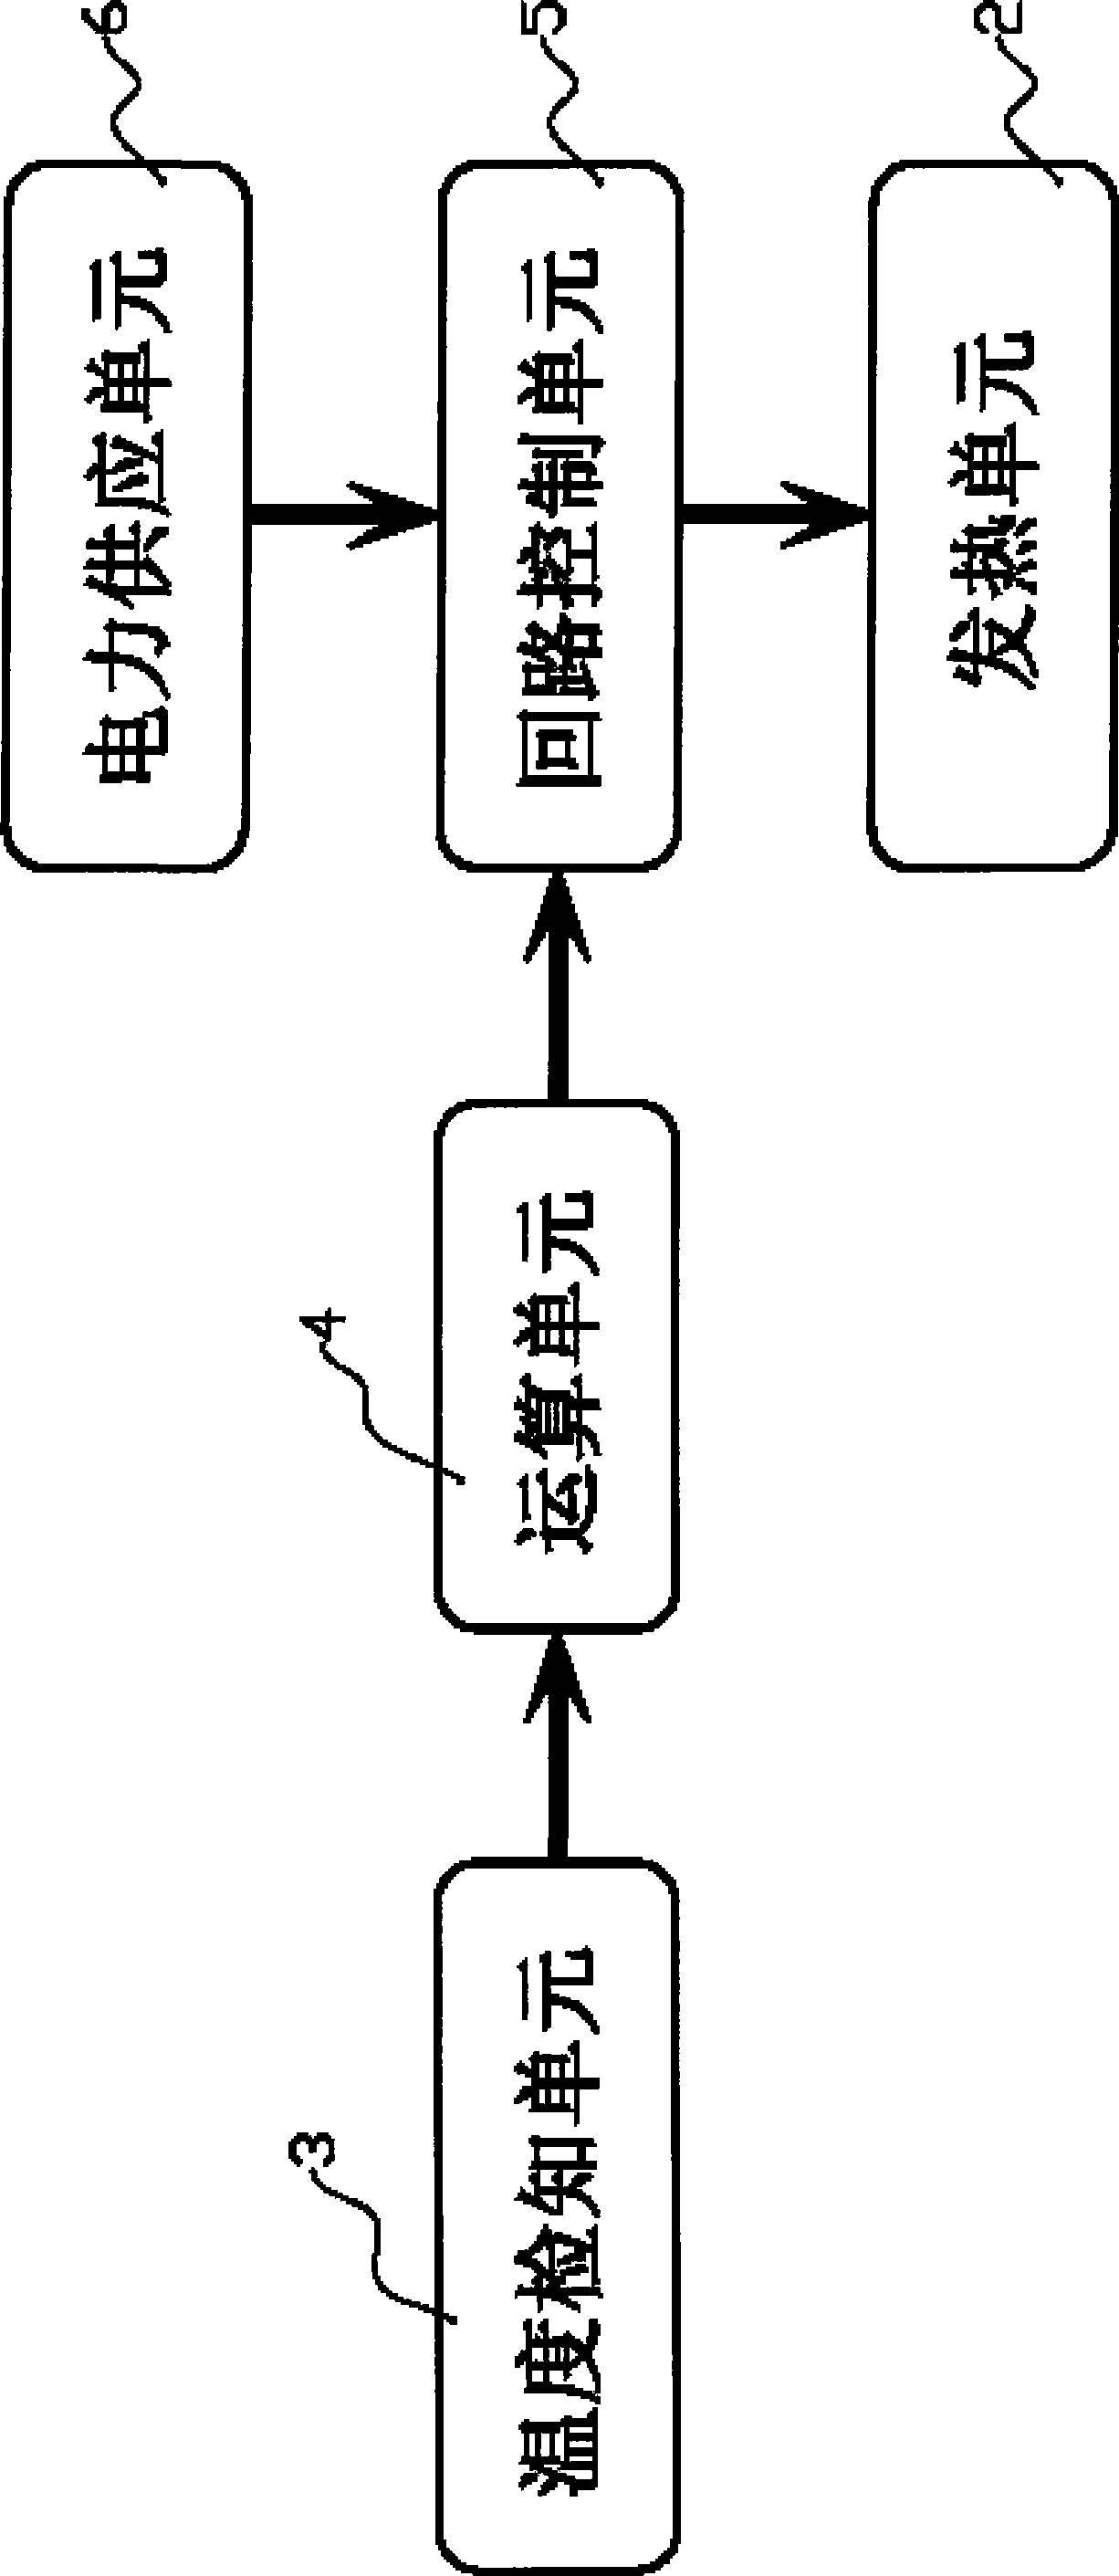 Portable warm wave moxibustion energy producer and method for producing the same